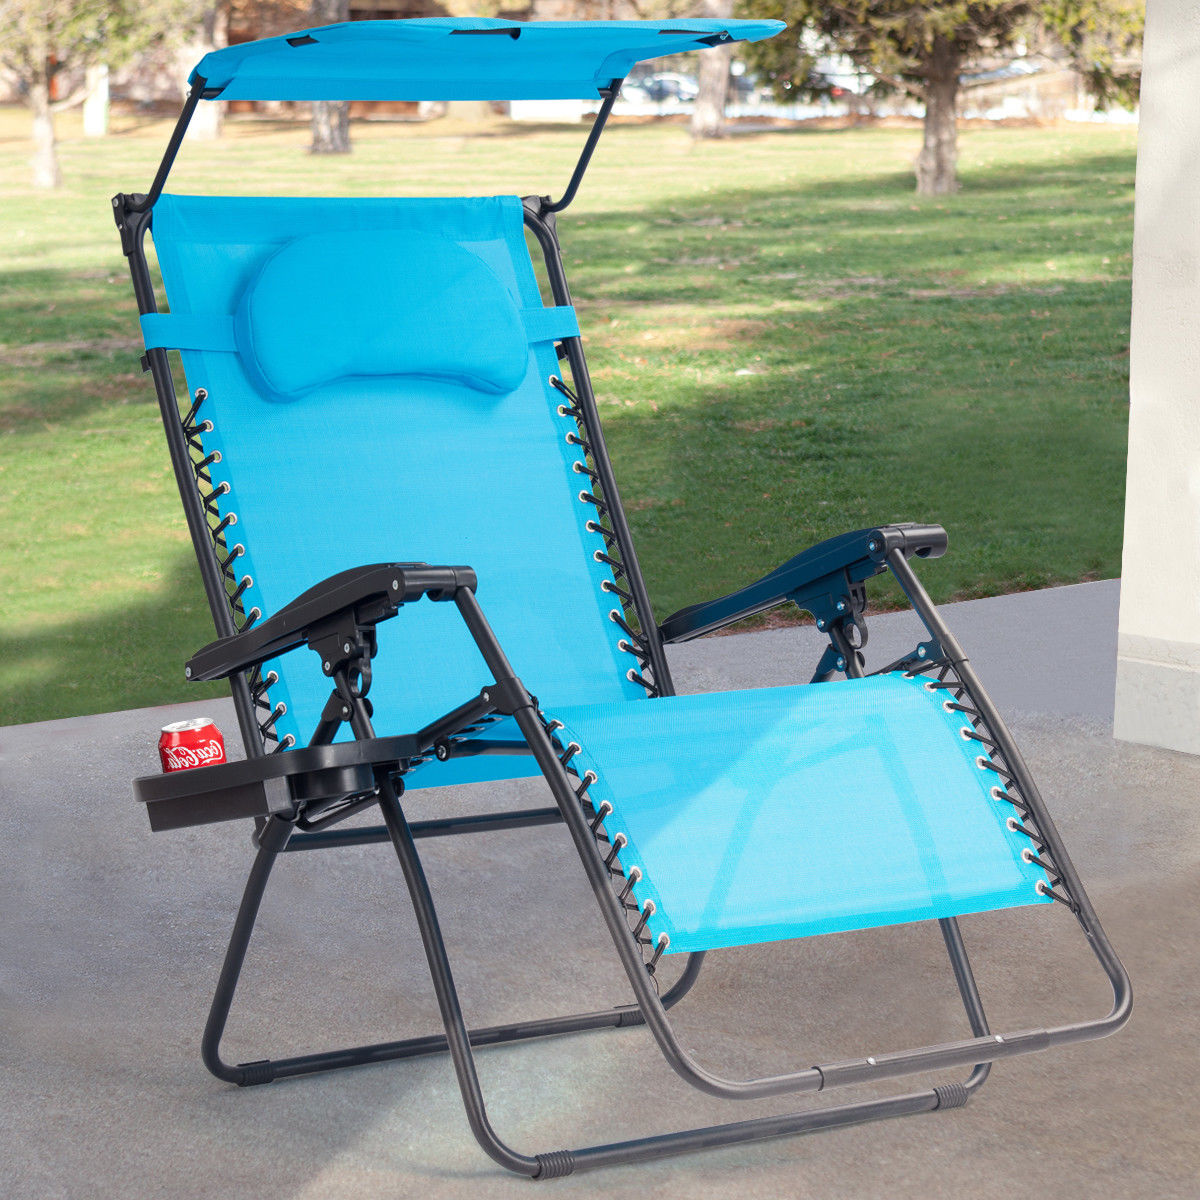 Gymax Folding Recliner Zero Gravity Lounge Chair W/ Shade Canopy Cup Holder Blue - image 1 of 10